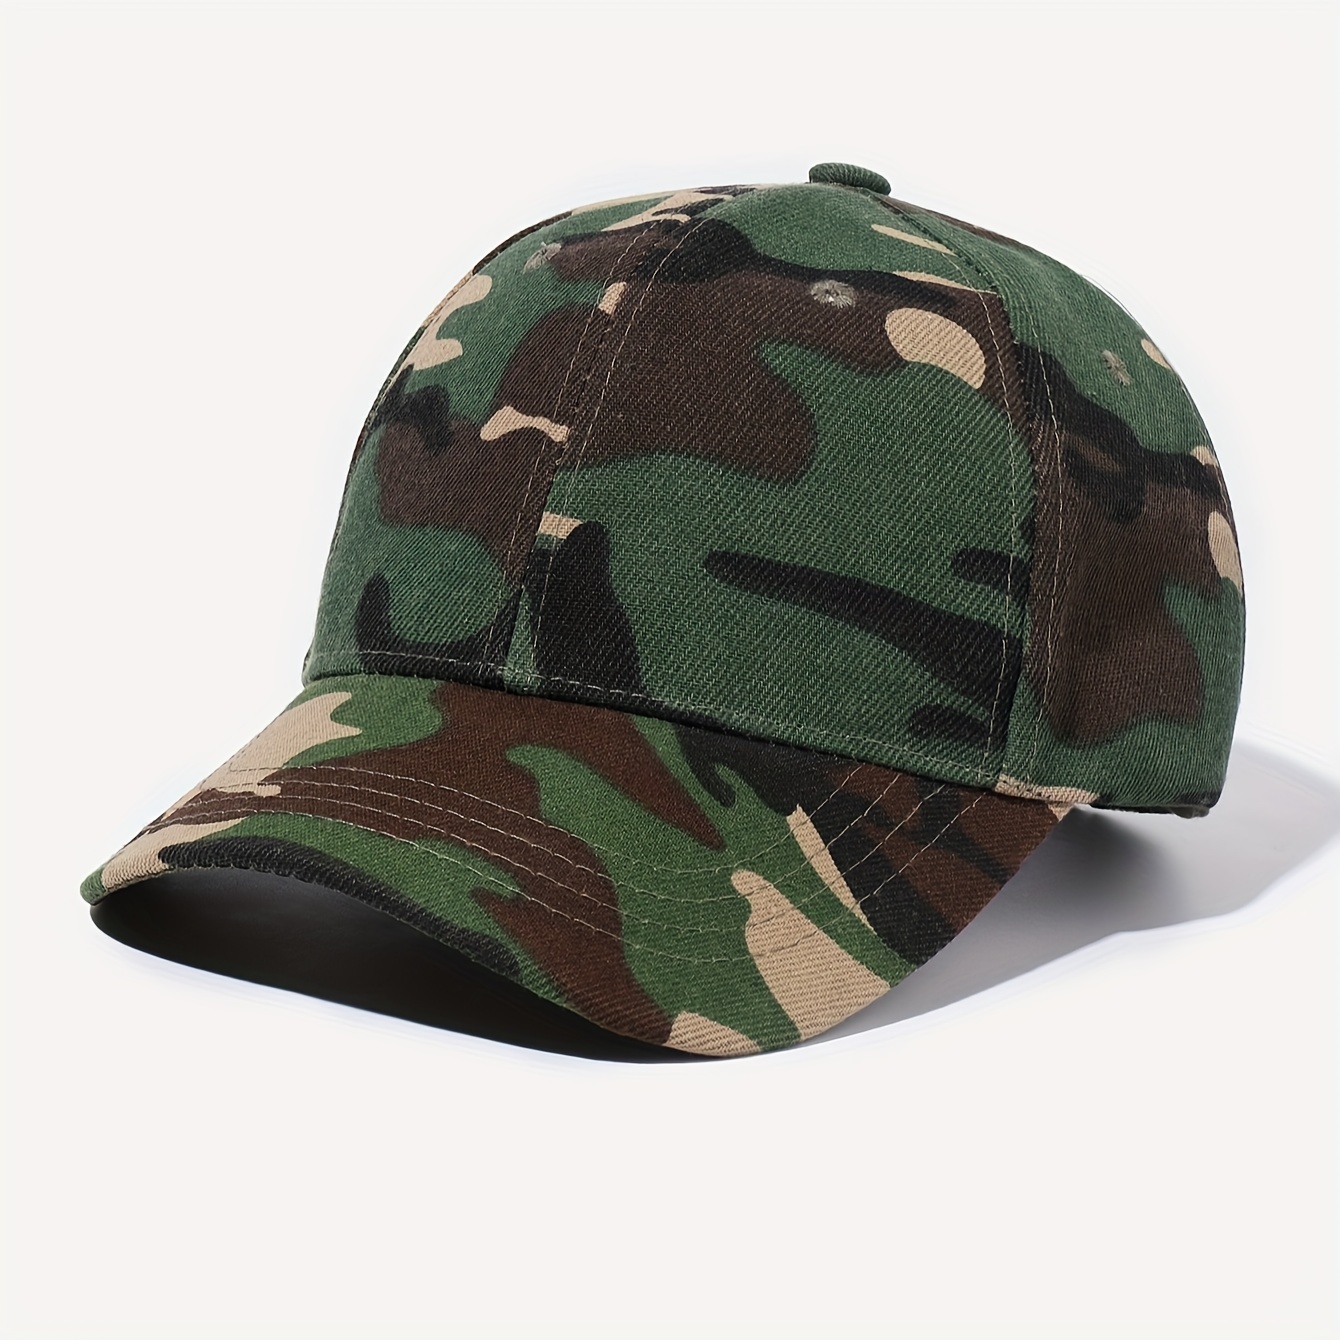 

Unisex Camouflage Baseball Cap Classic Dark Green Dad Hat Breathable Adjustable Tactical Hats For Women Men